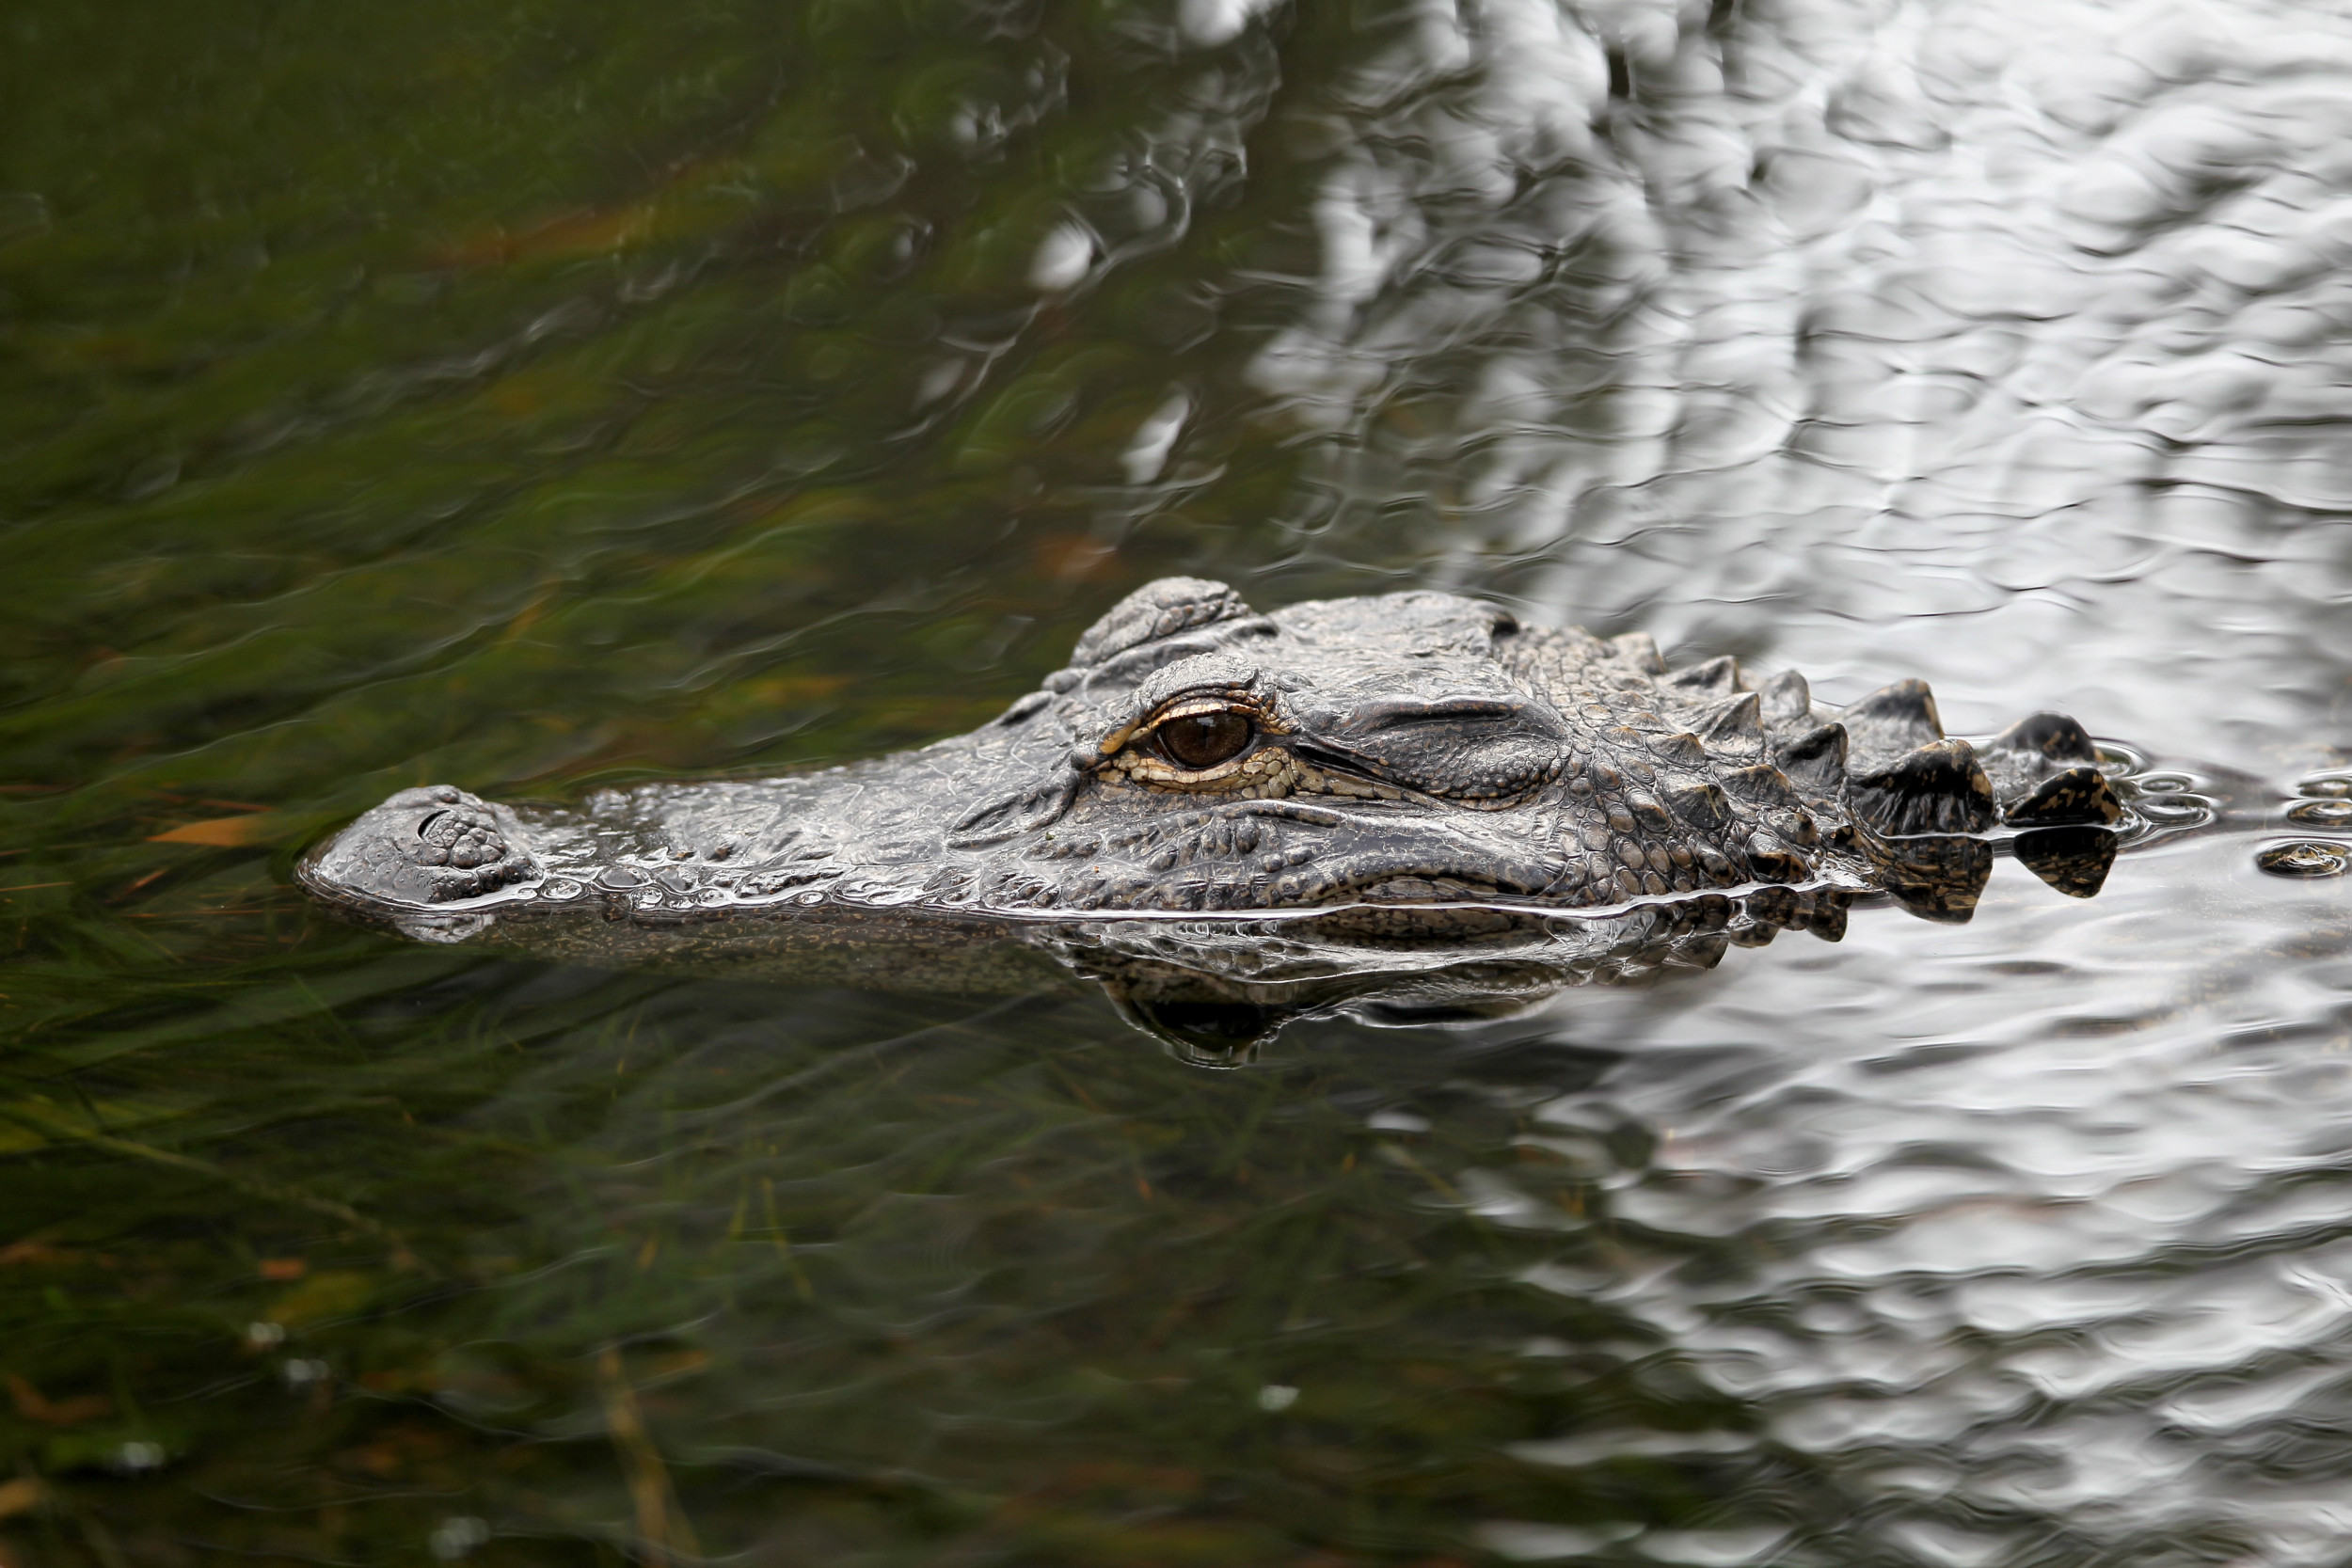 South Carolina Woman Killed in Alligator Attack Tried to 'Pet' the